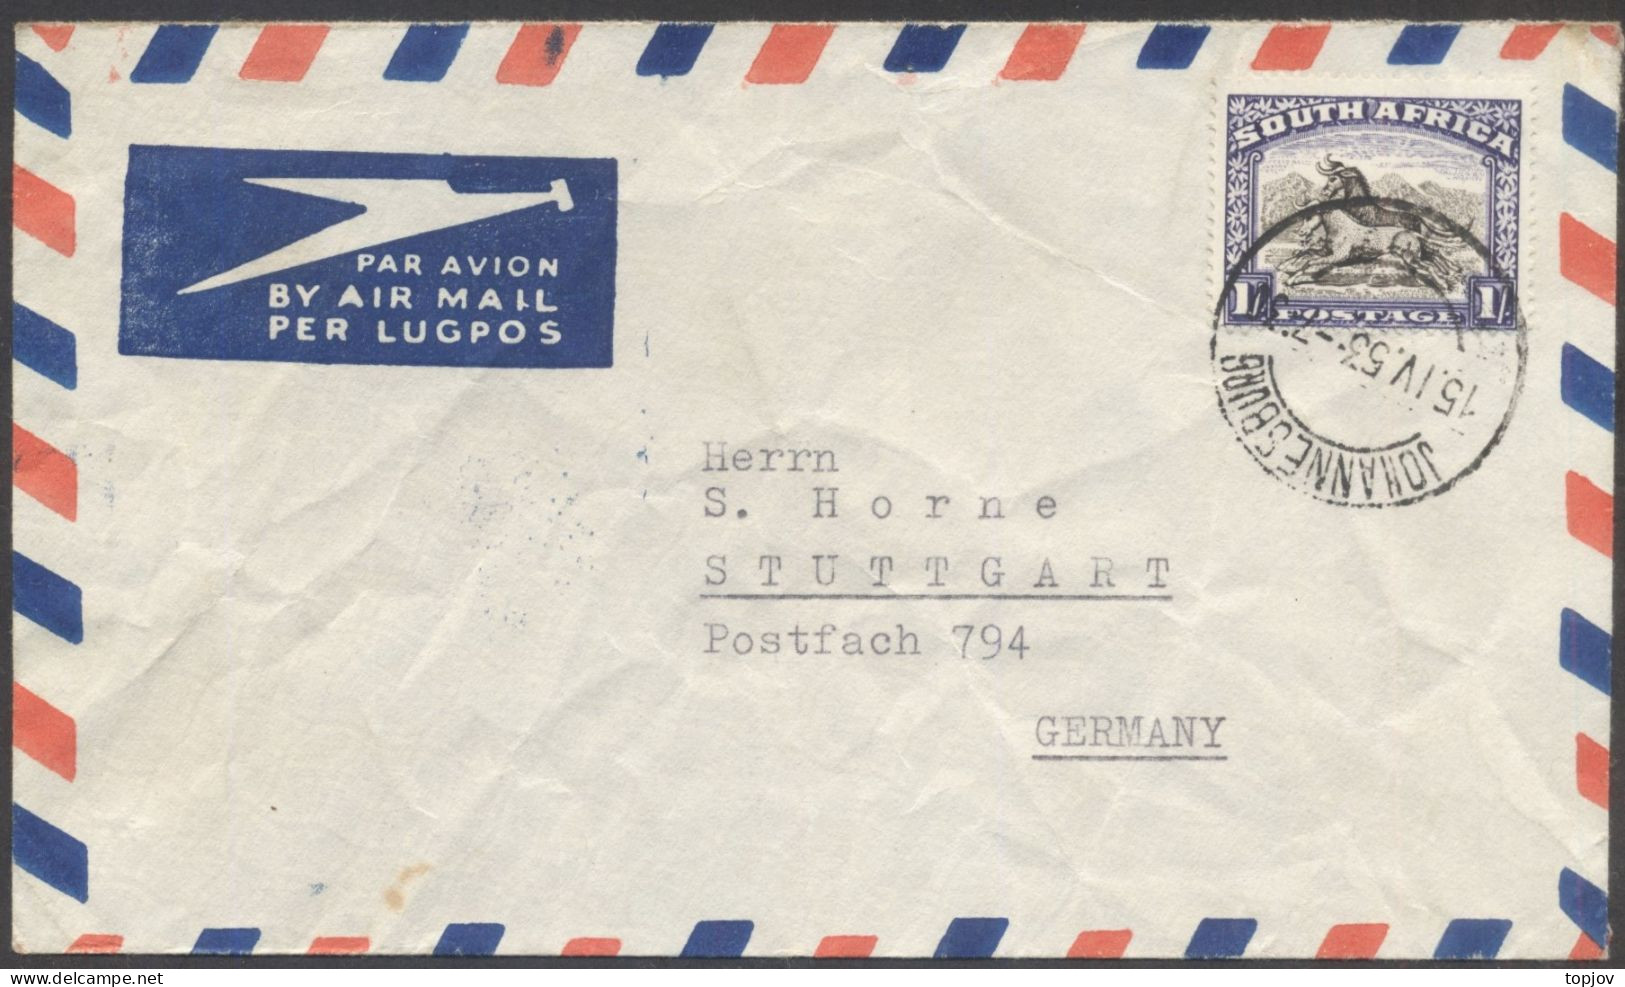 SOUTH AFRICA  RSA - JOHANNESBURG To GERMANY AIRMAIL - ANIMALS - 1953 - Luchtpost